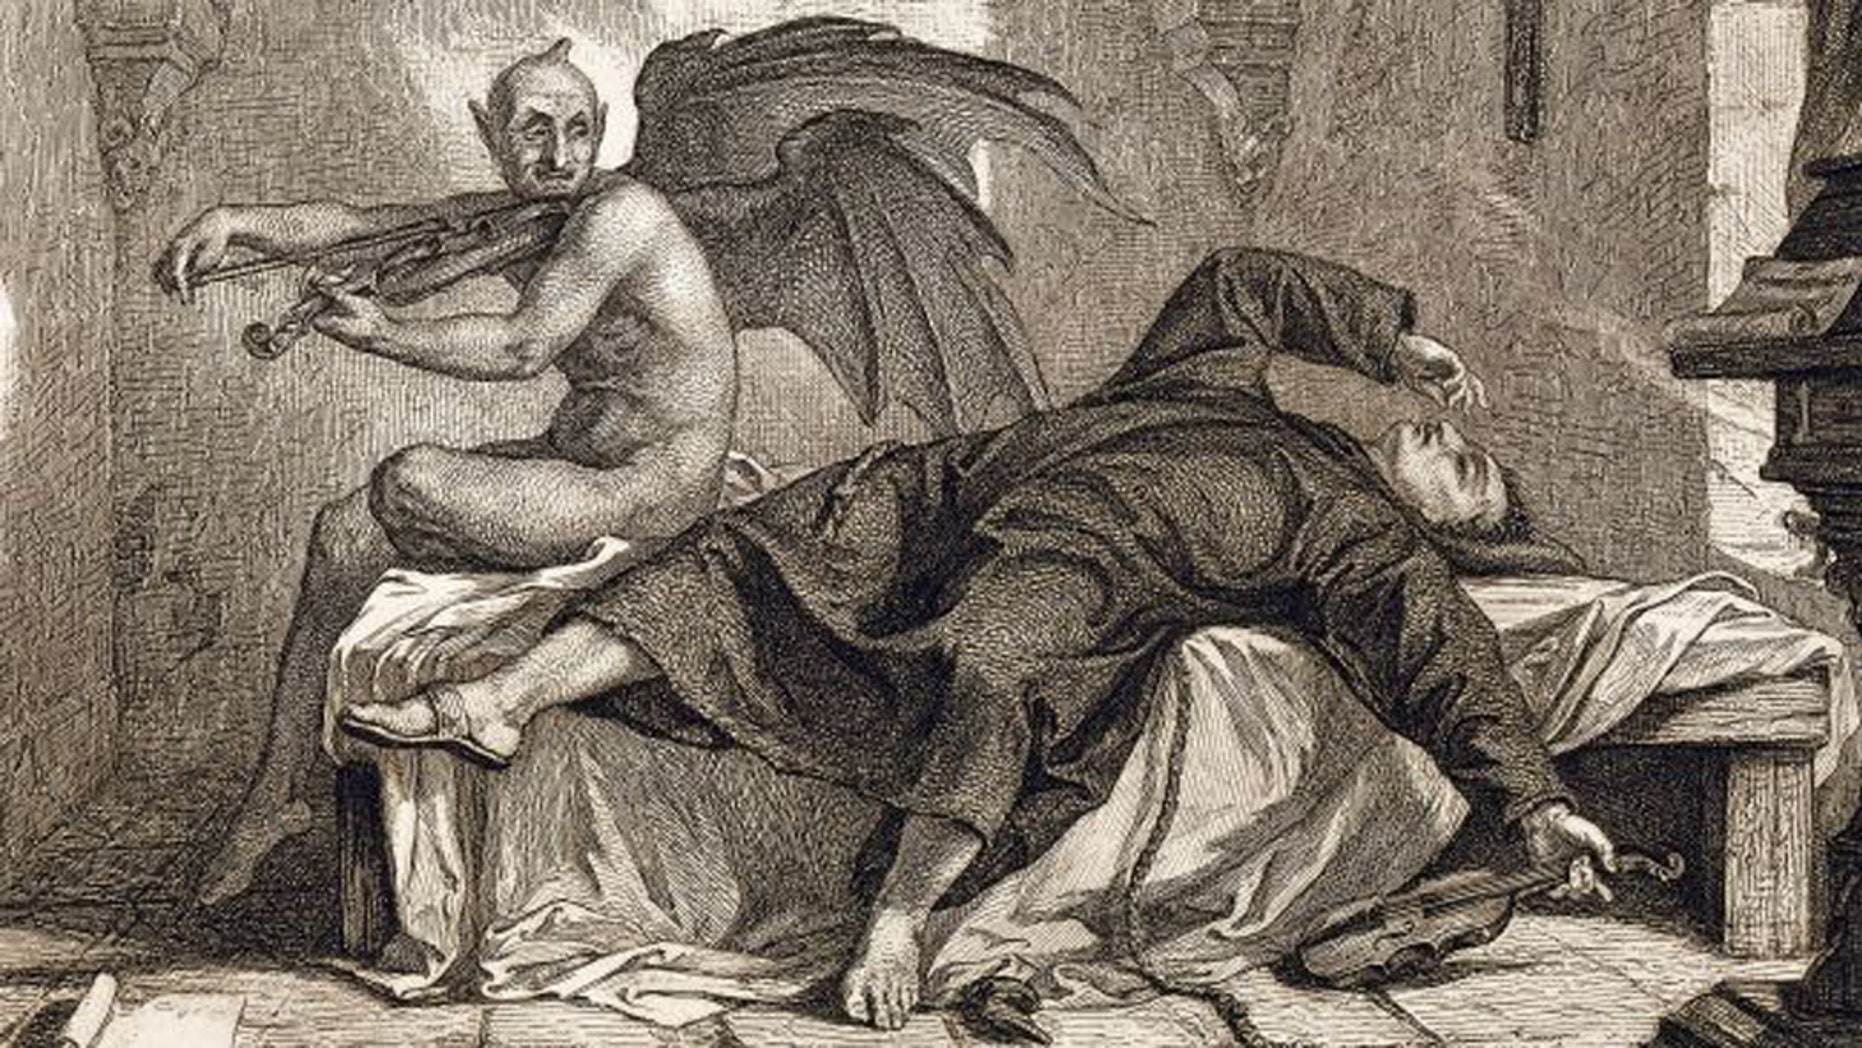 The devil and other forces of evil may have originated in the human imagination as spiritual explanations for contagious illness. (Credit: DeAgostini/Getty)